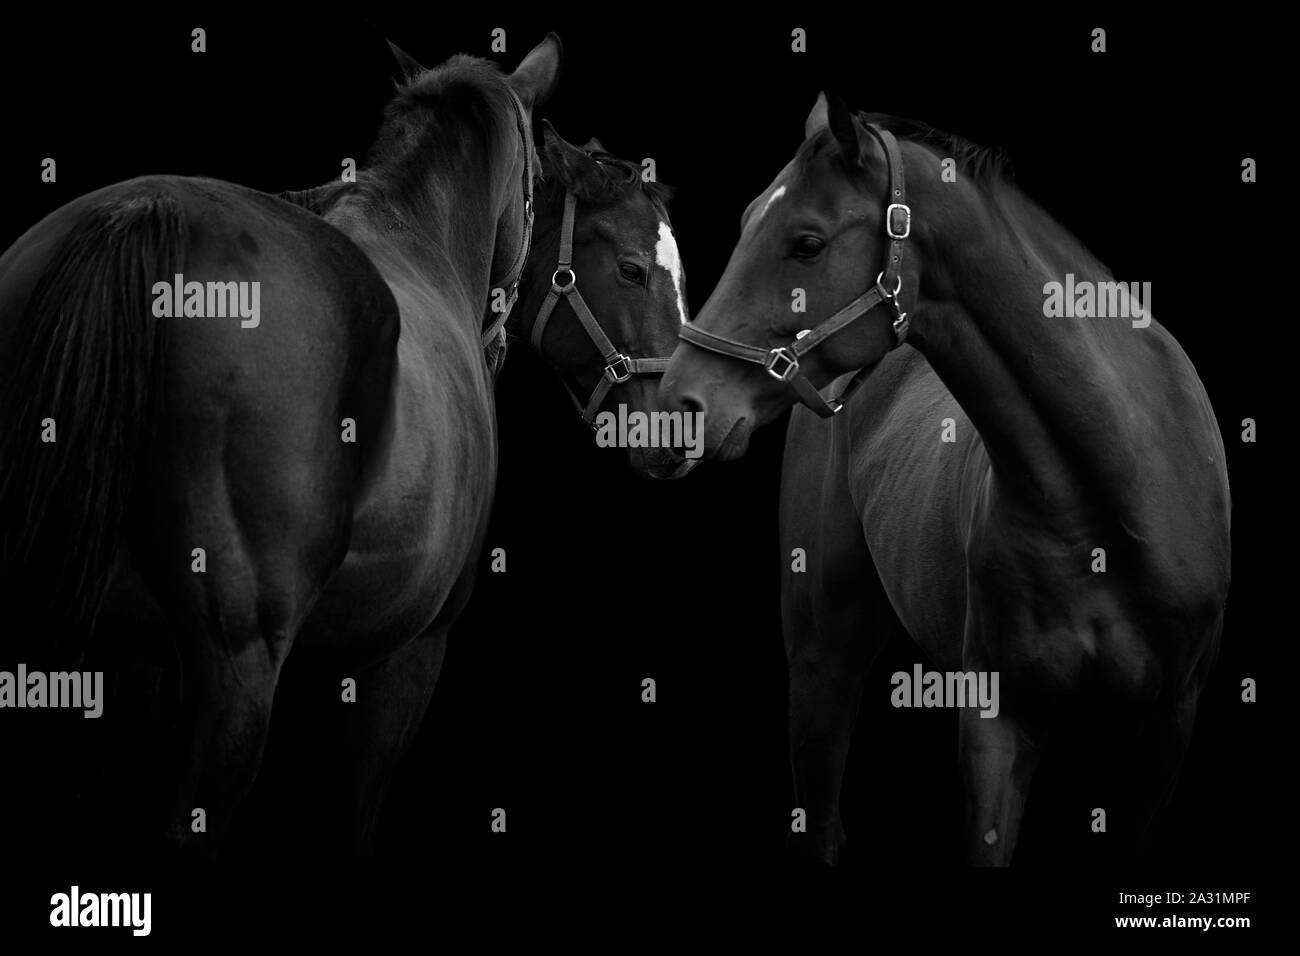 Black and white image of three beautiful horses together and isolated on a black background Stock Photo